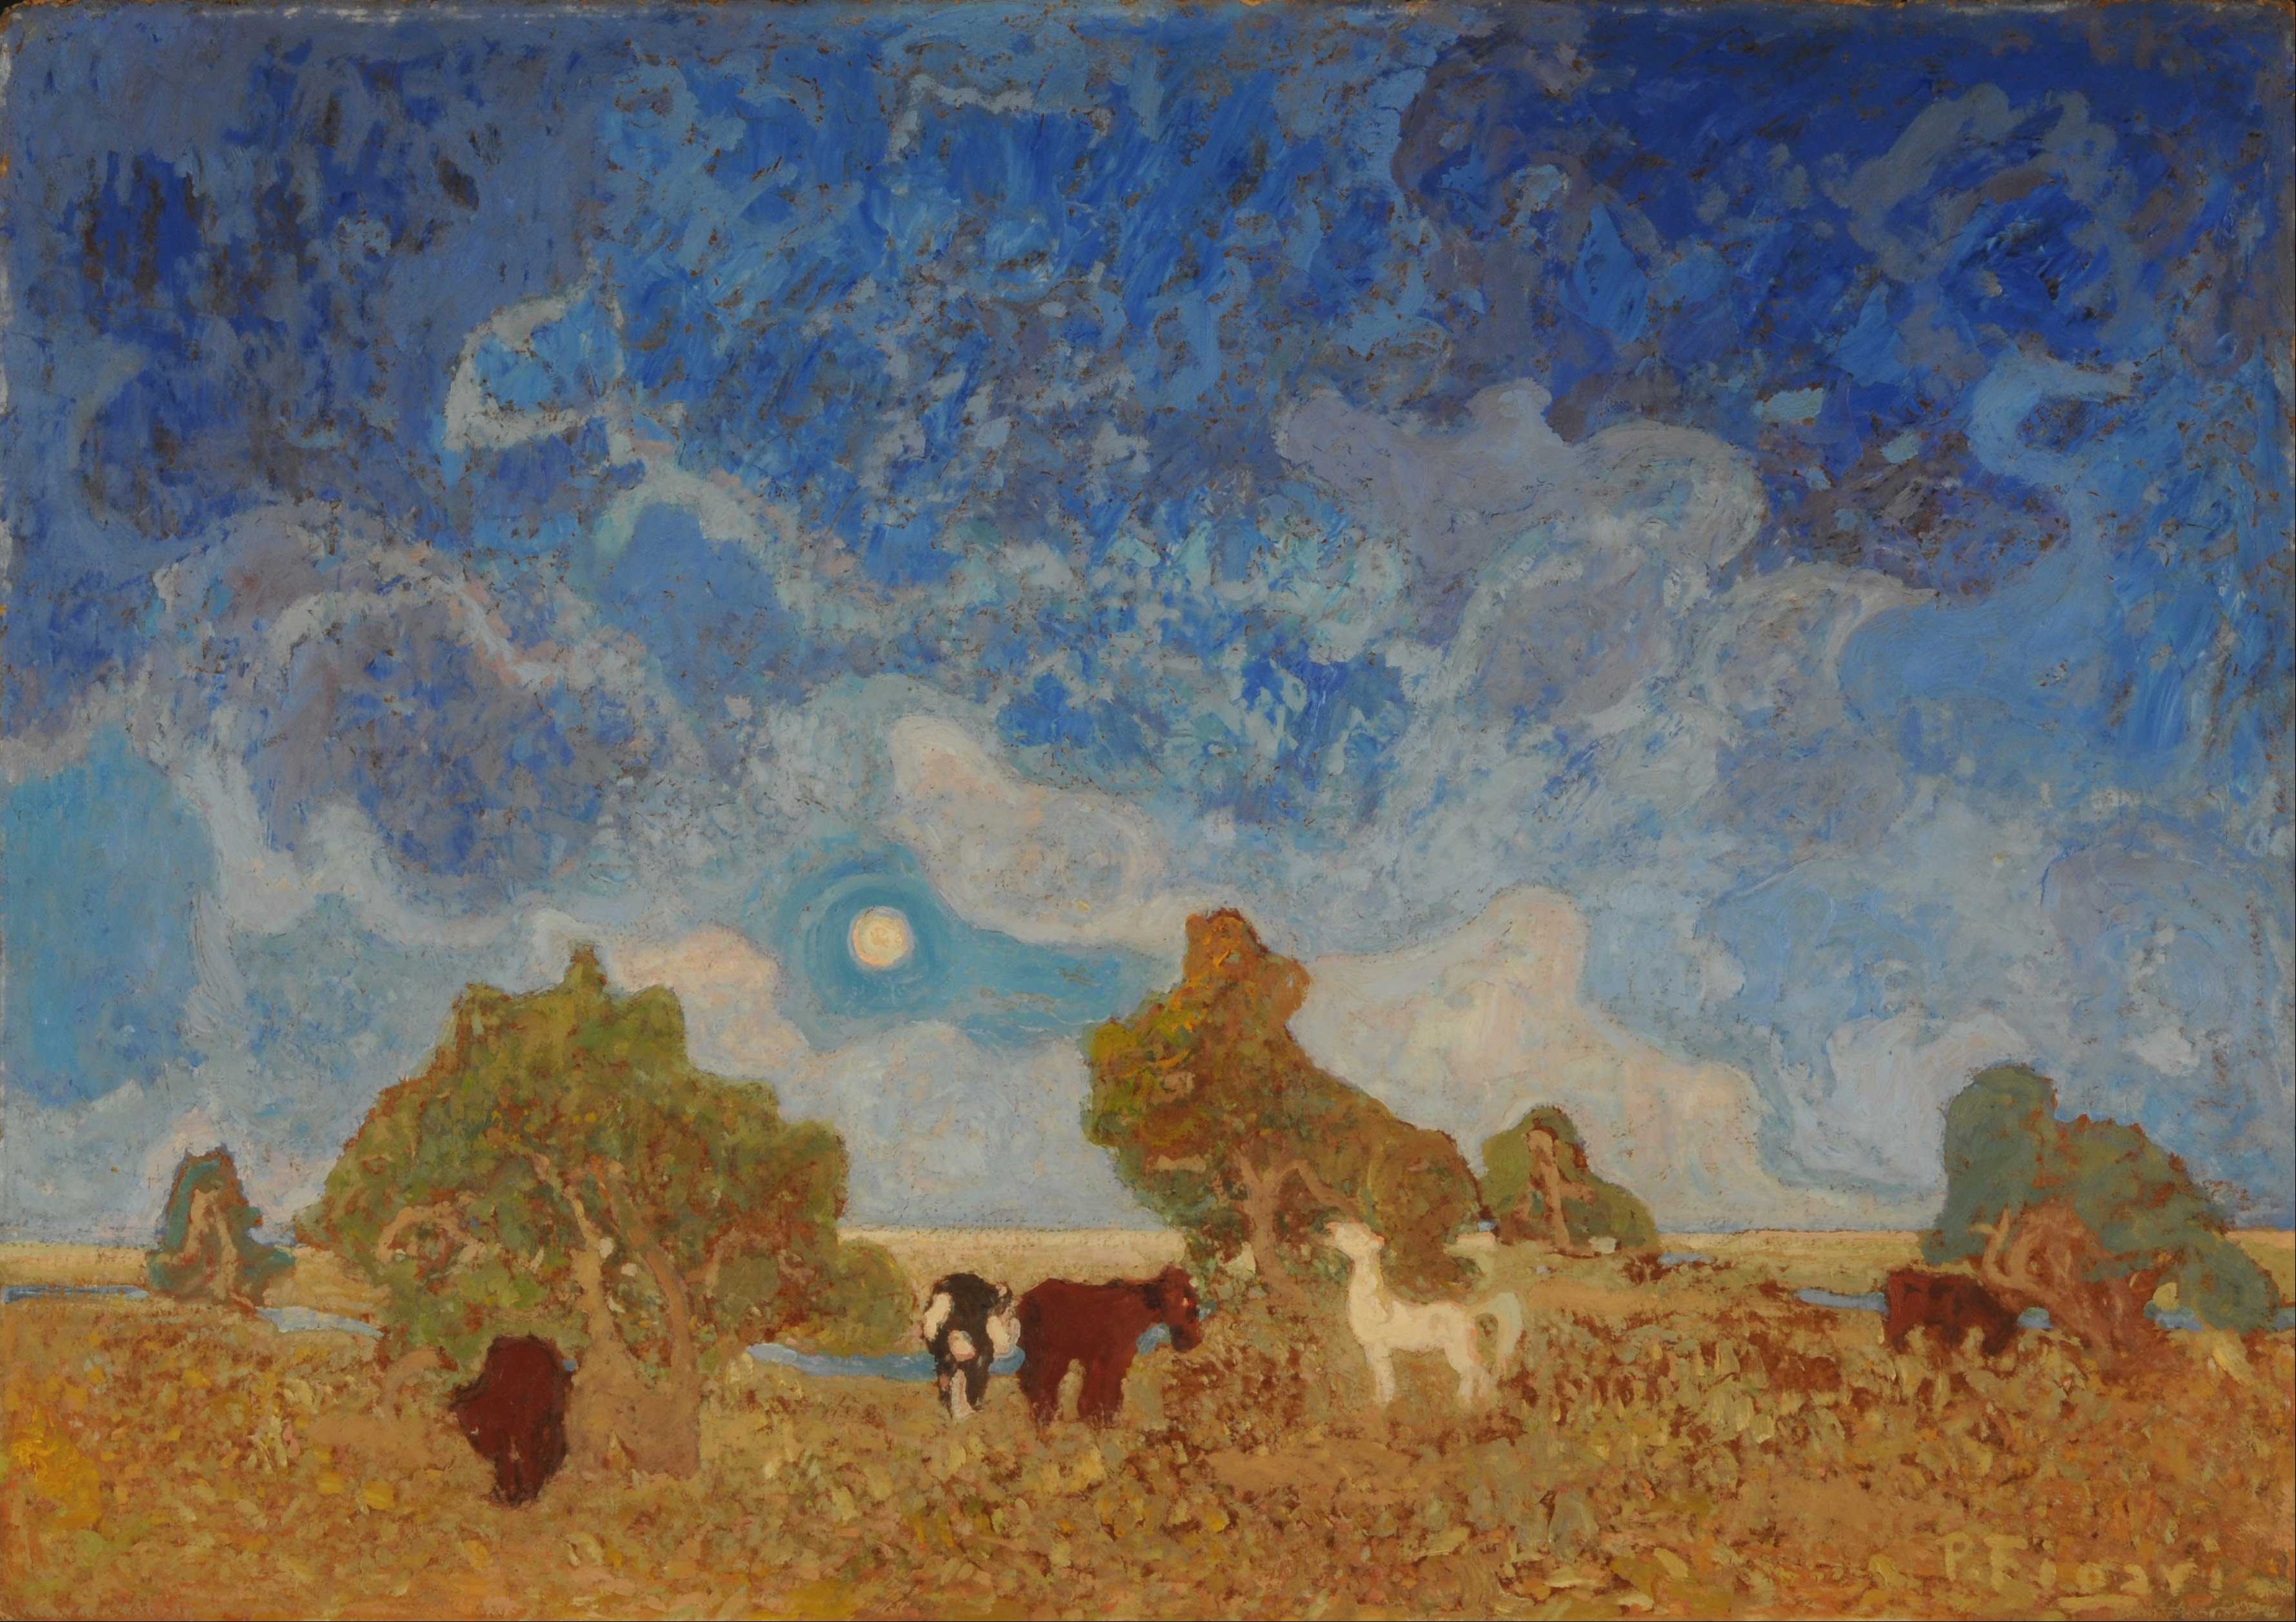 Find out more about Pedro Figari - Pampa